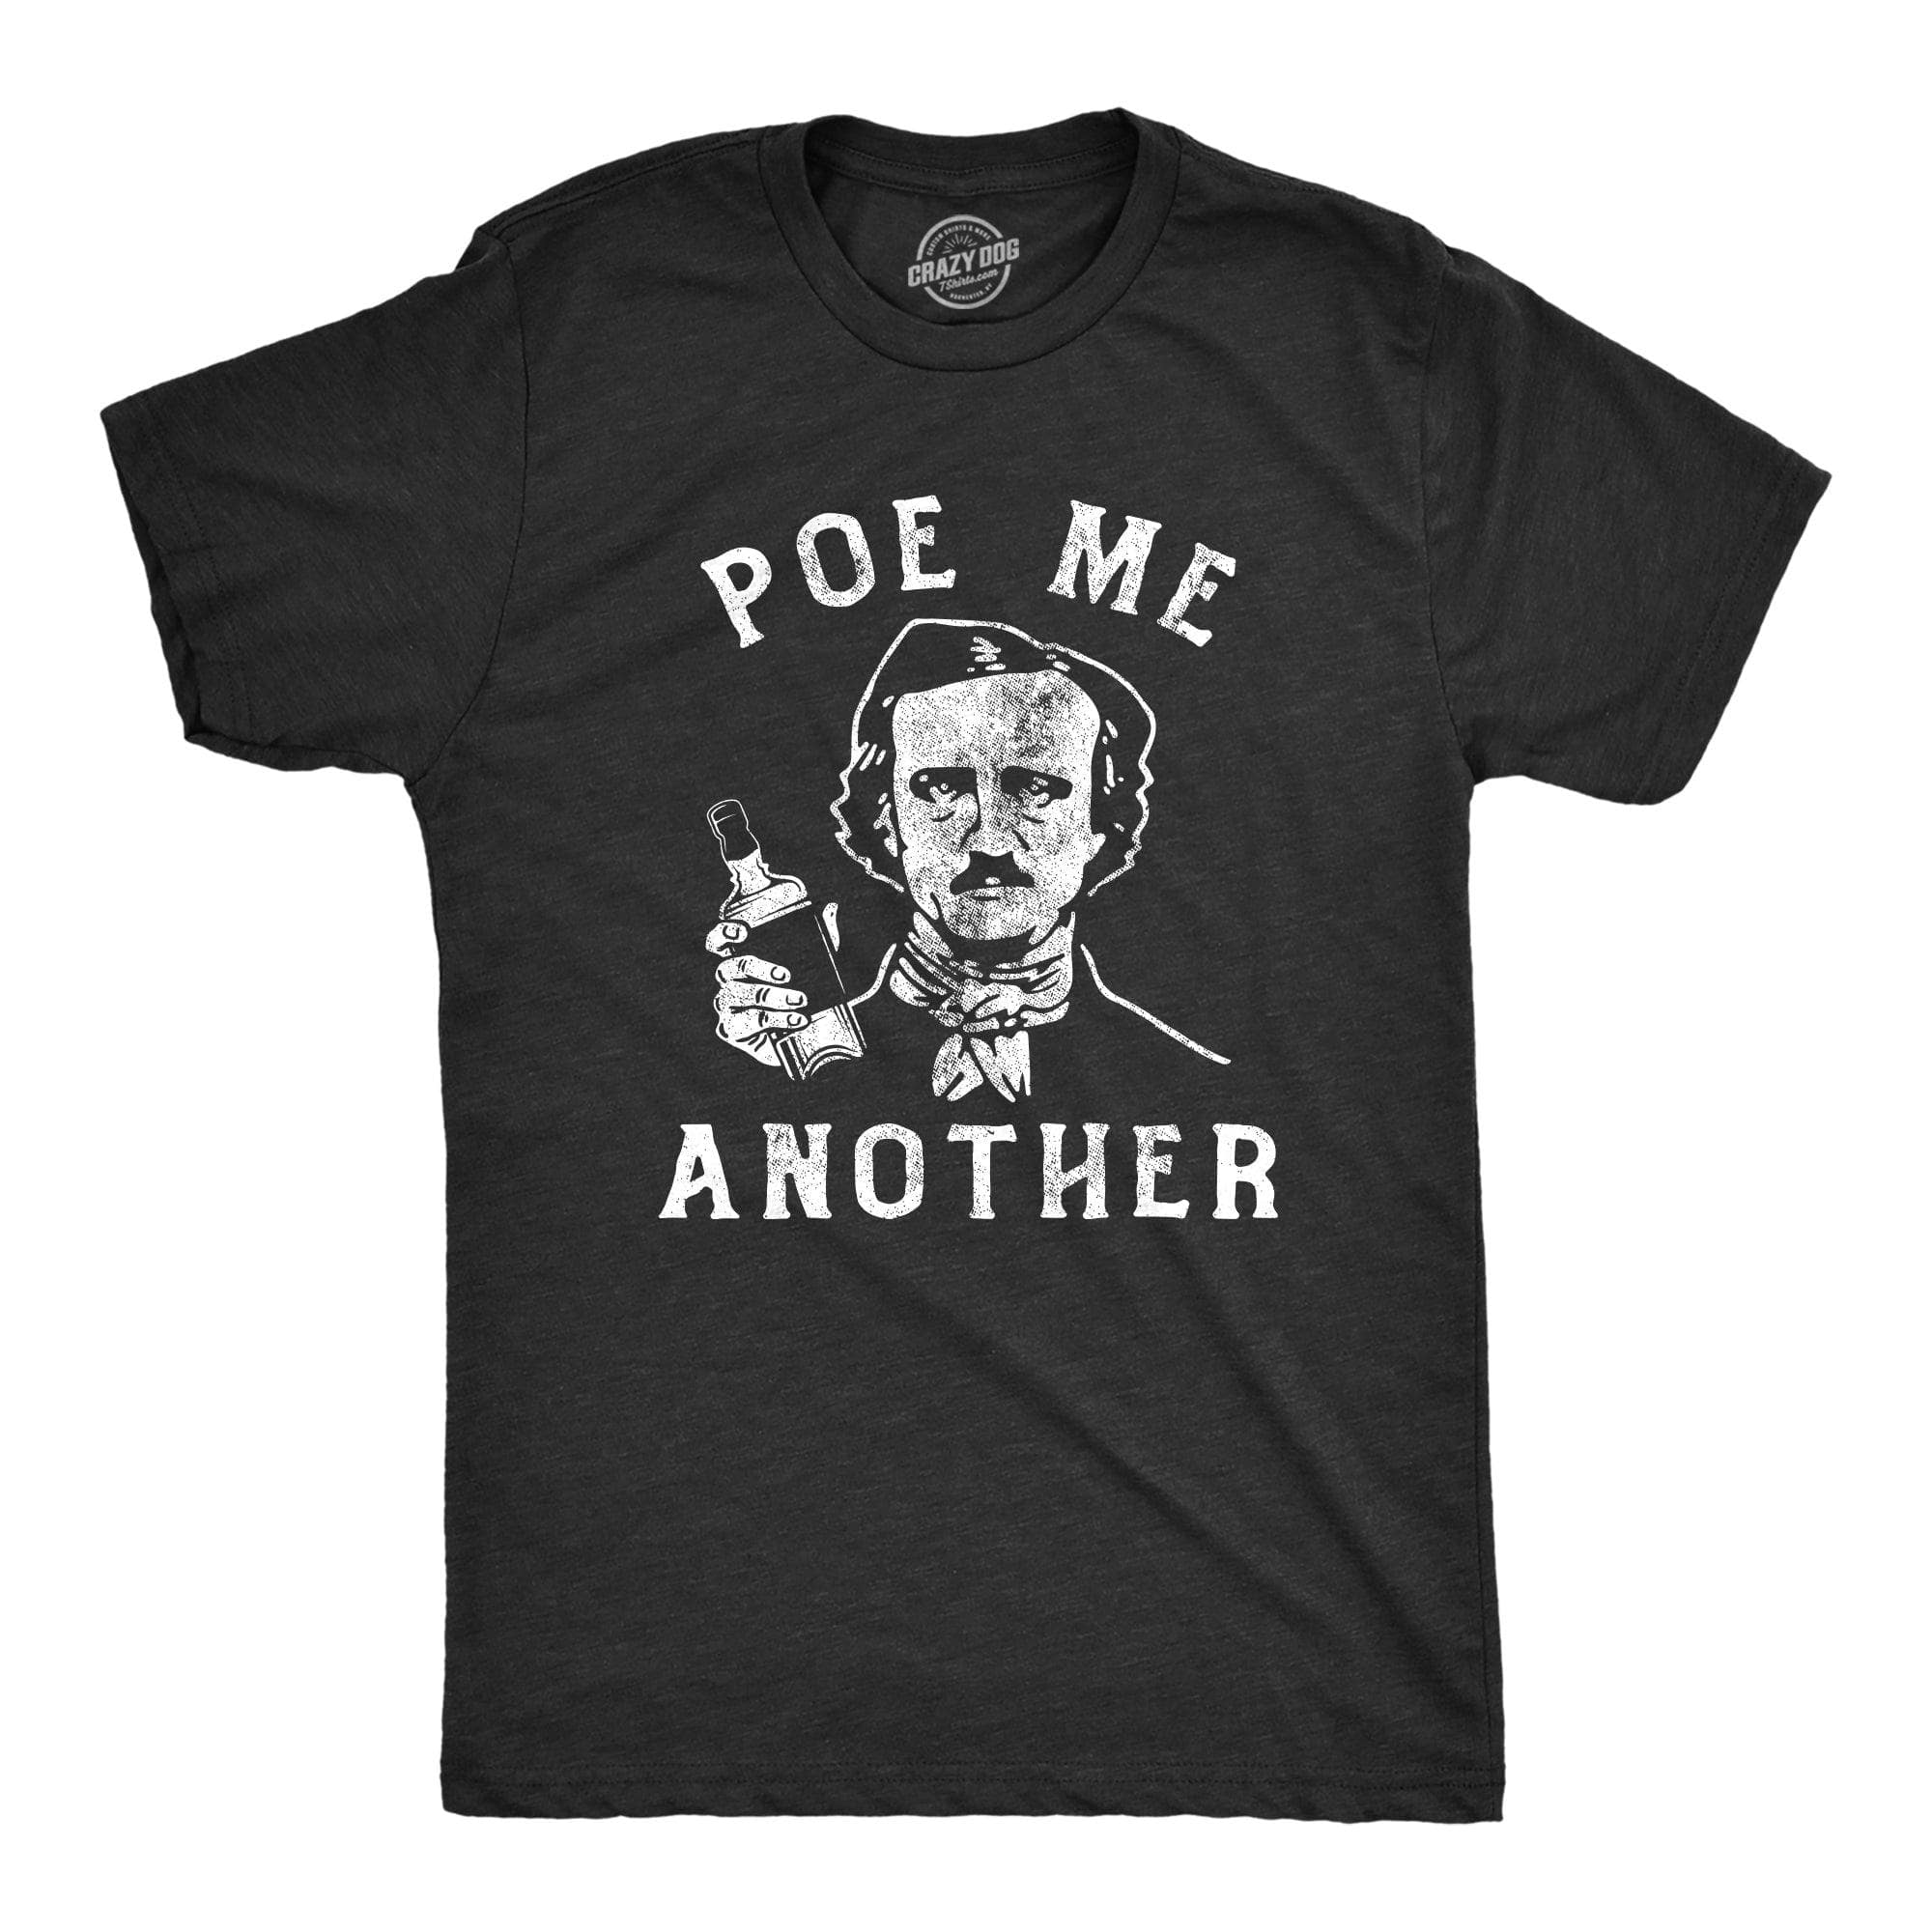 Poe Me Another Men's Tshirt  -  Crazy Dog T-Shirts